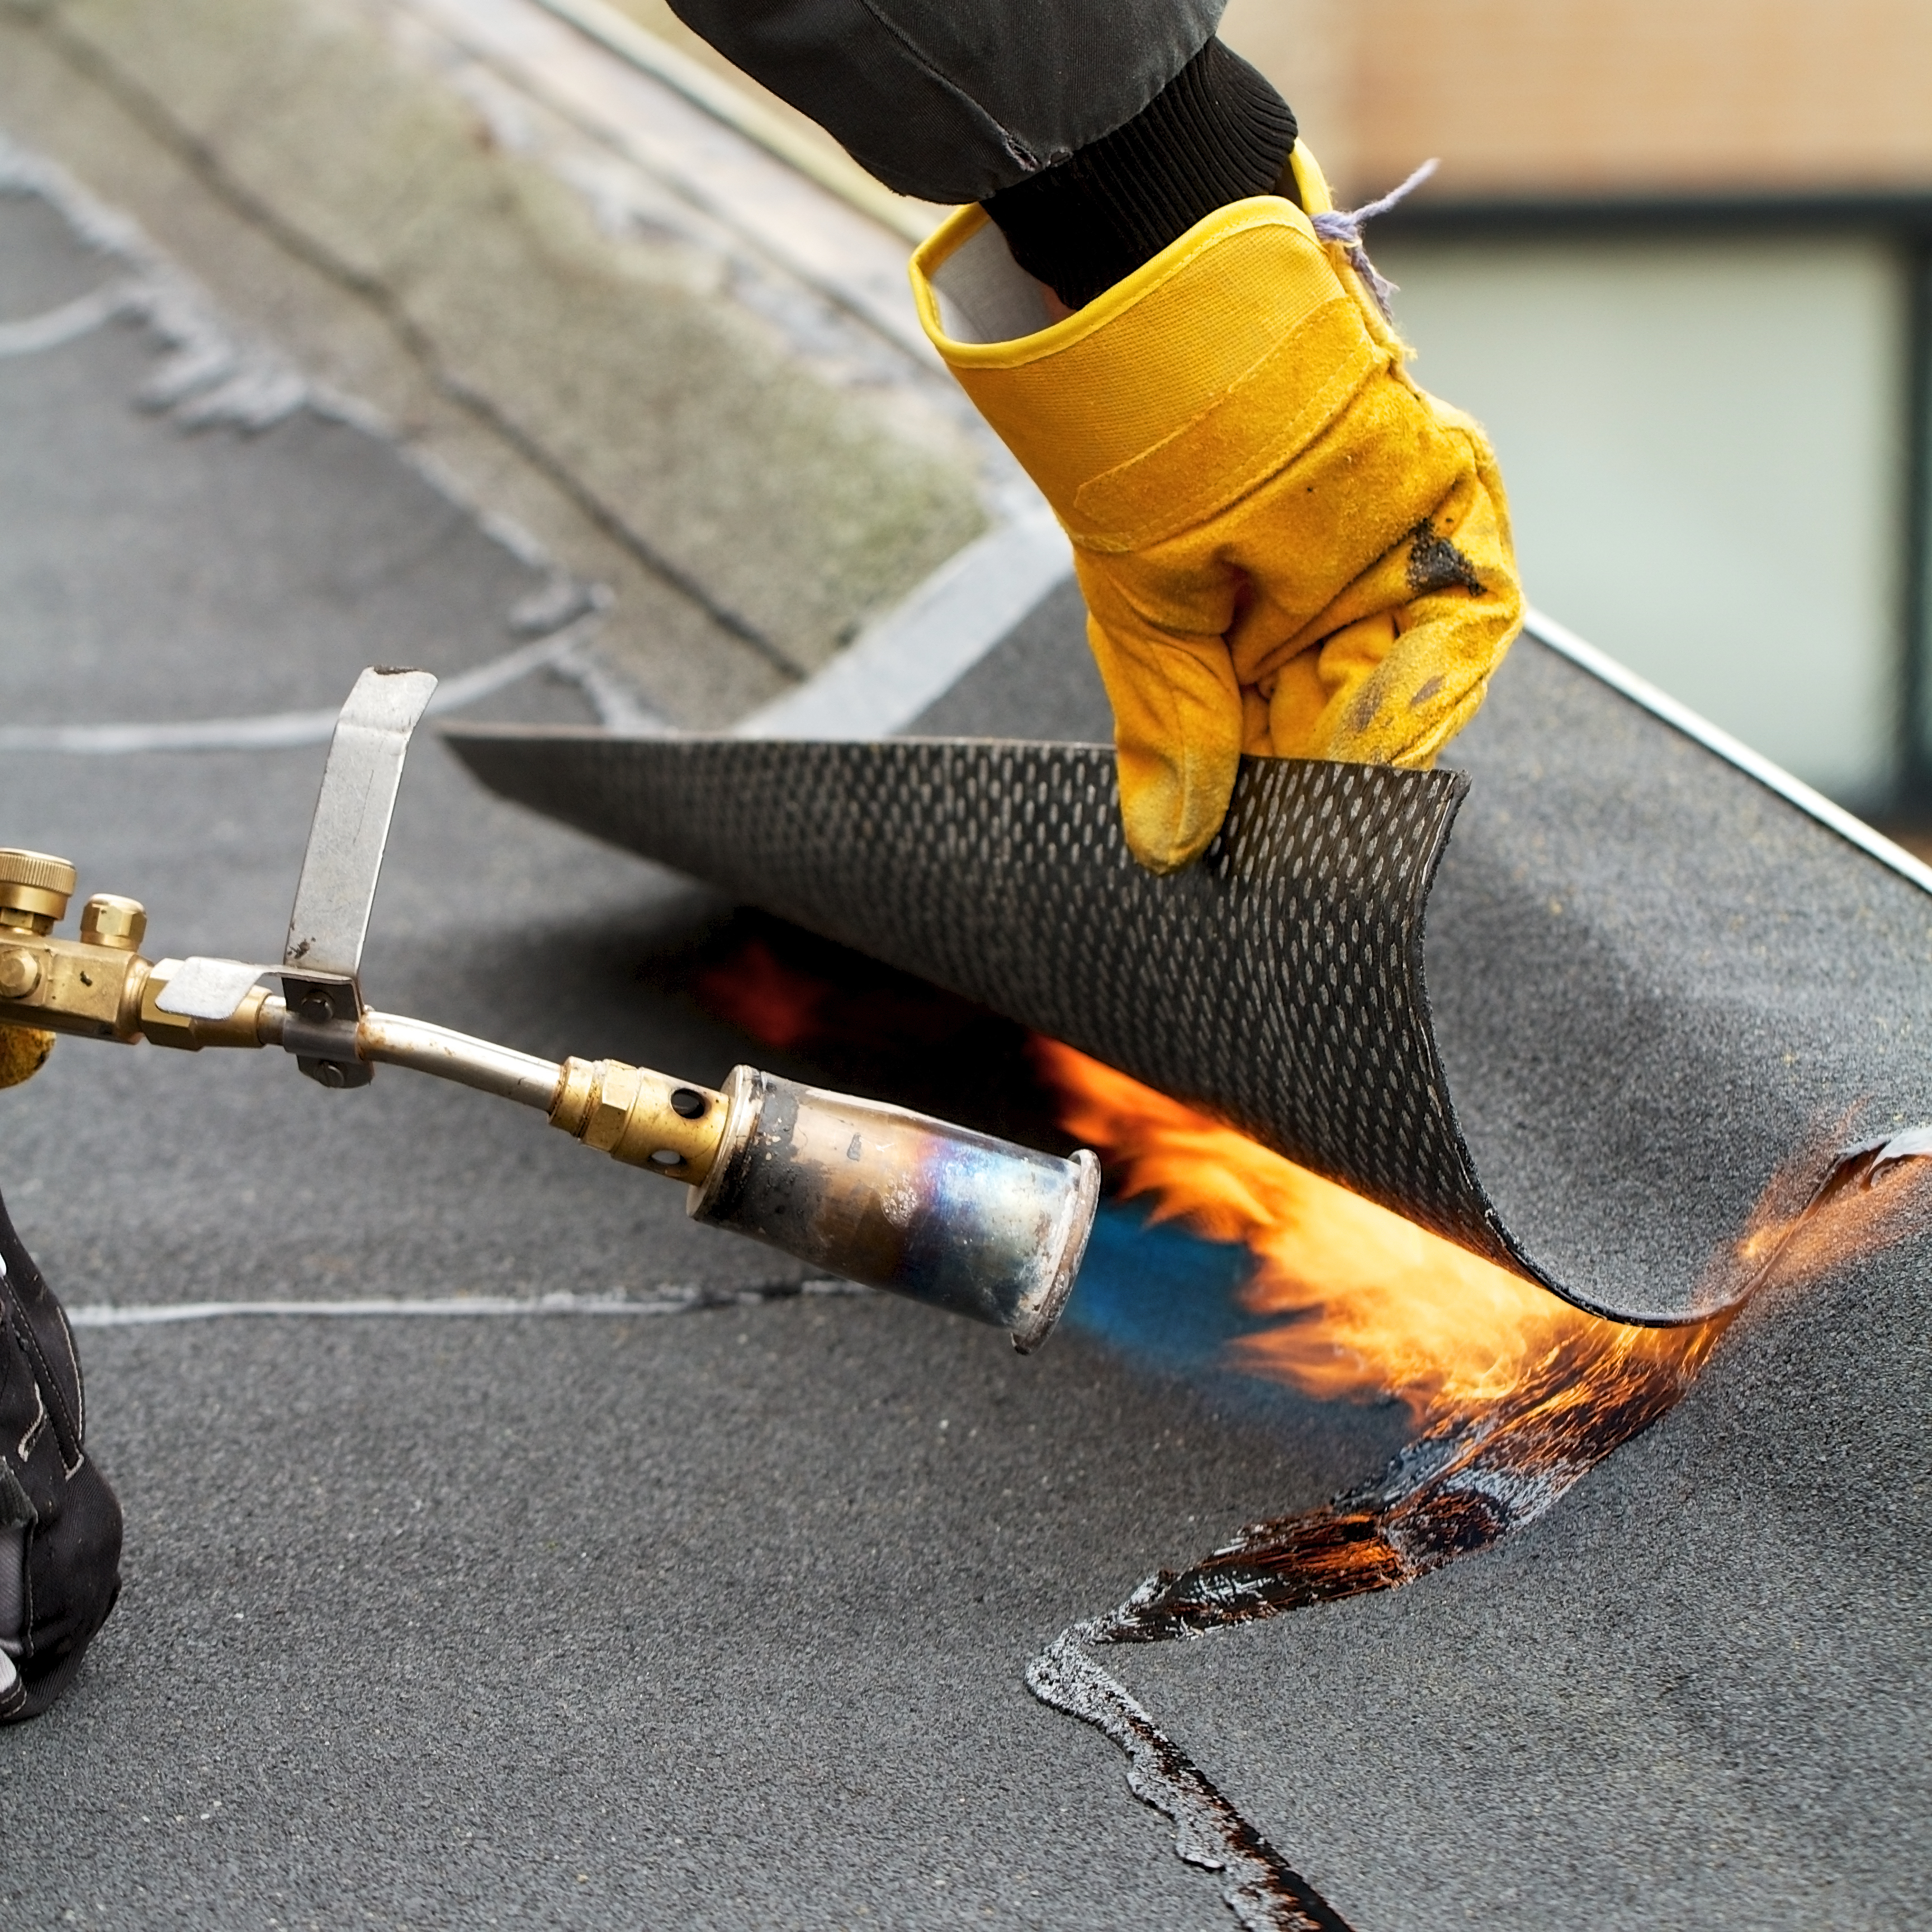 Titan Roofing LLC Offers Summerville SC Roof Repair and Replacement Services Call Today 843-647-3183